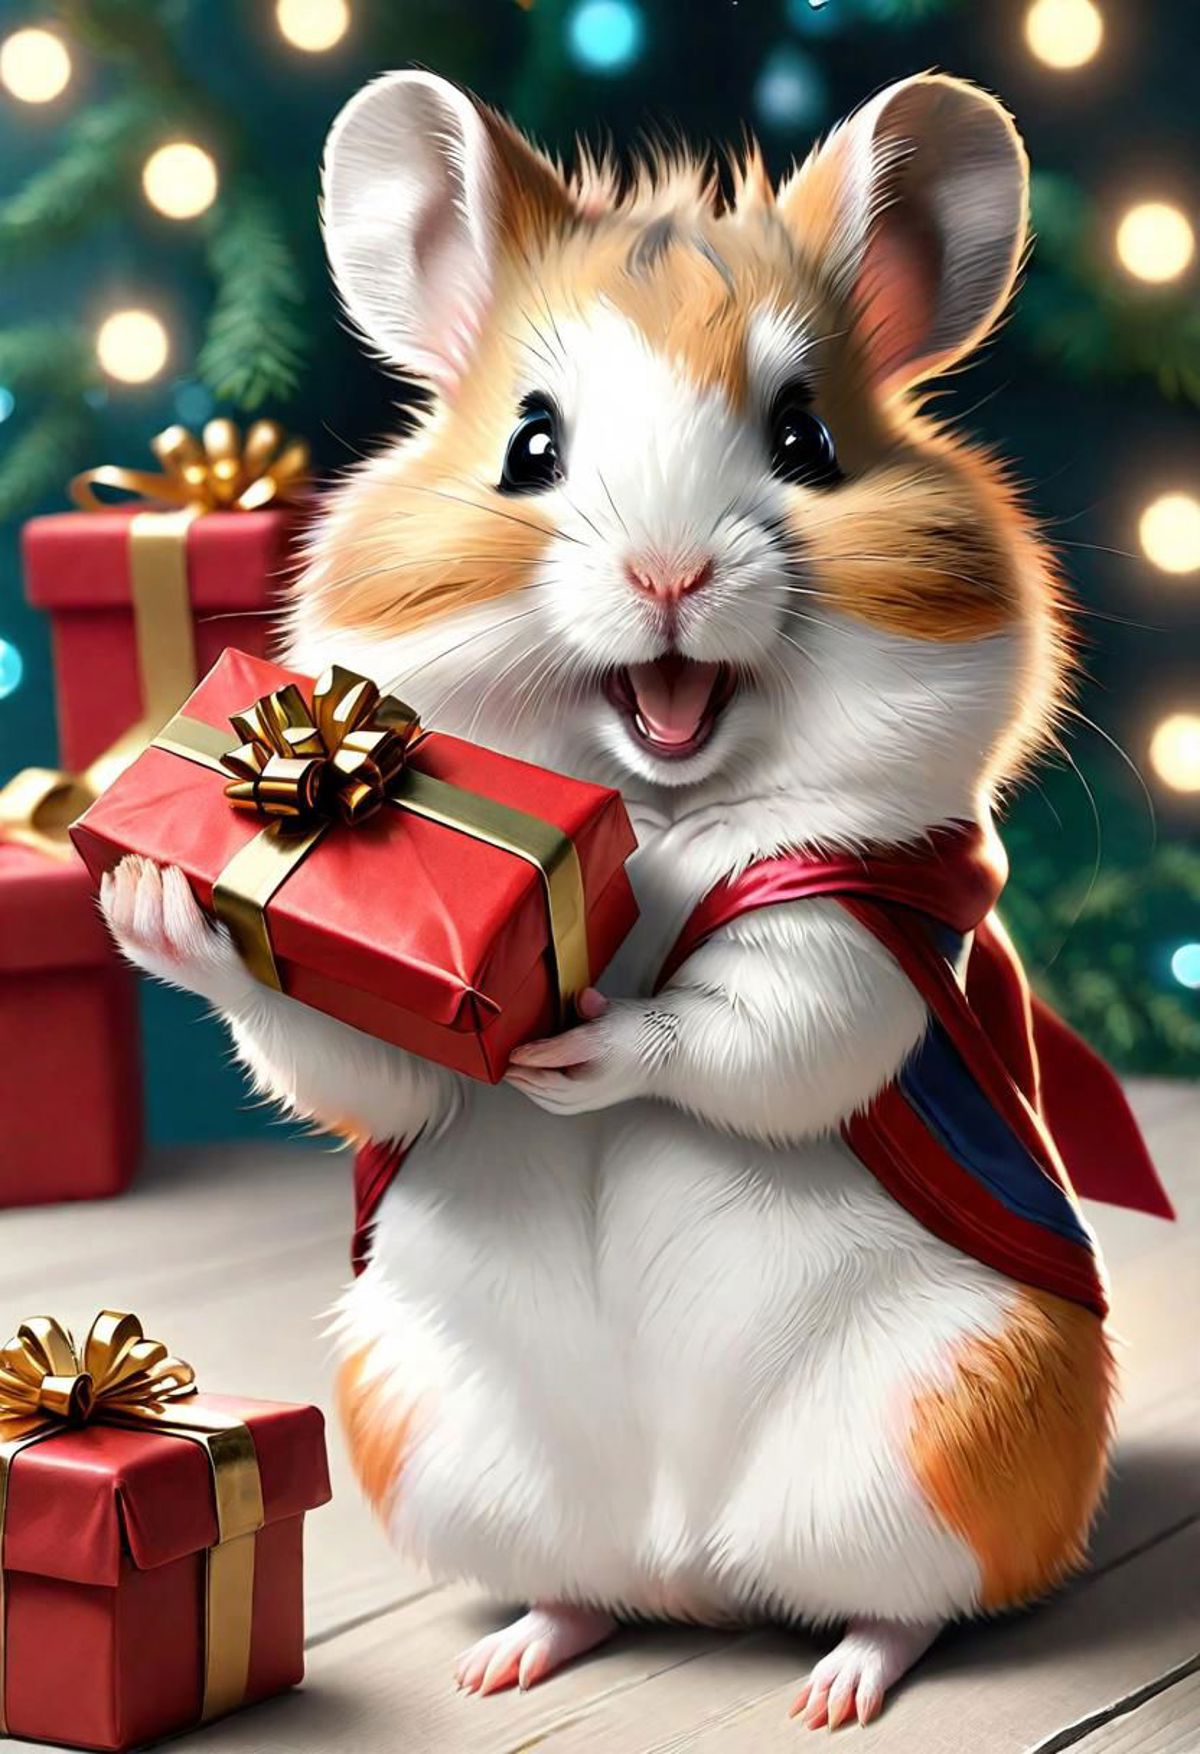 A cute hamster in a Santa outfit holding a red box.